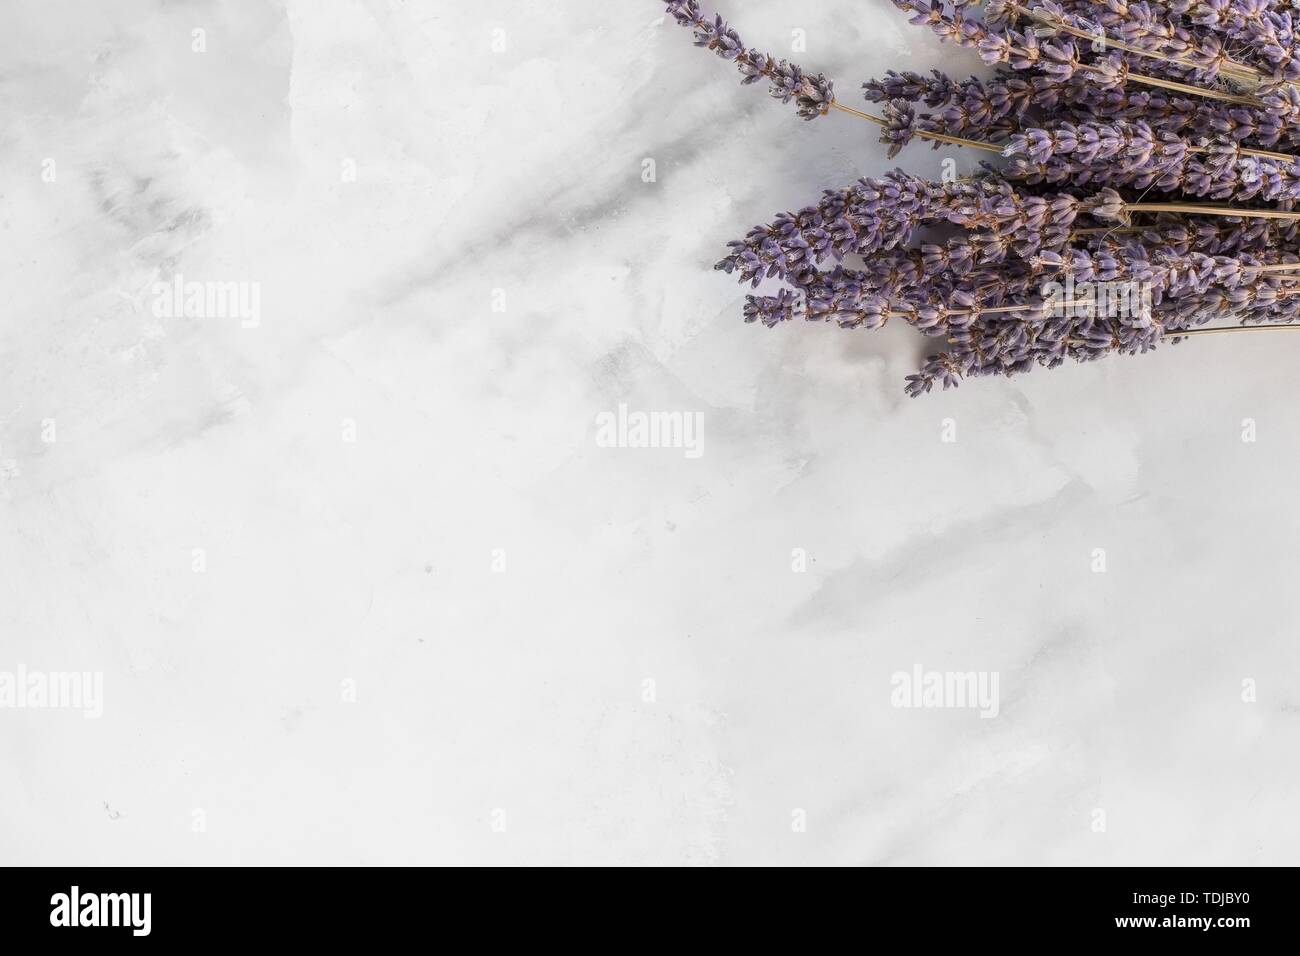 Dried purple lavender flowers laid on a white surface Stock Photo